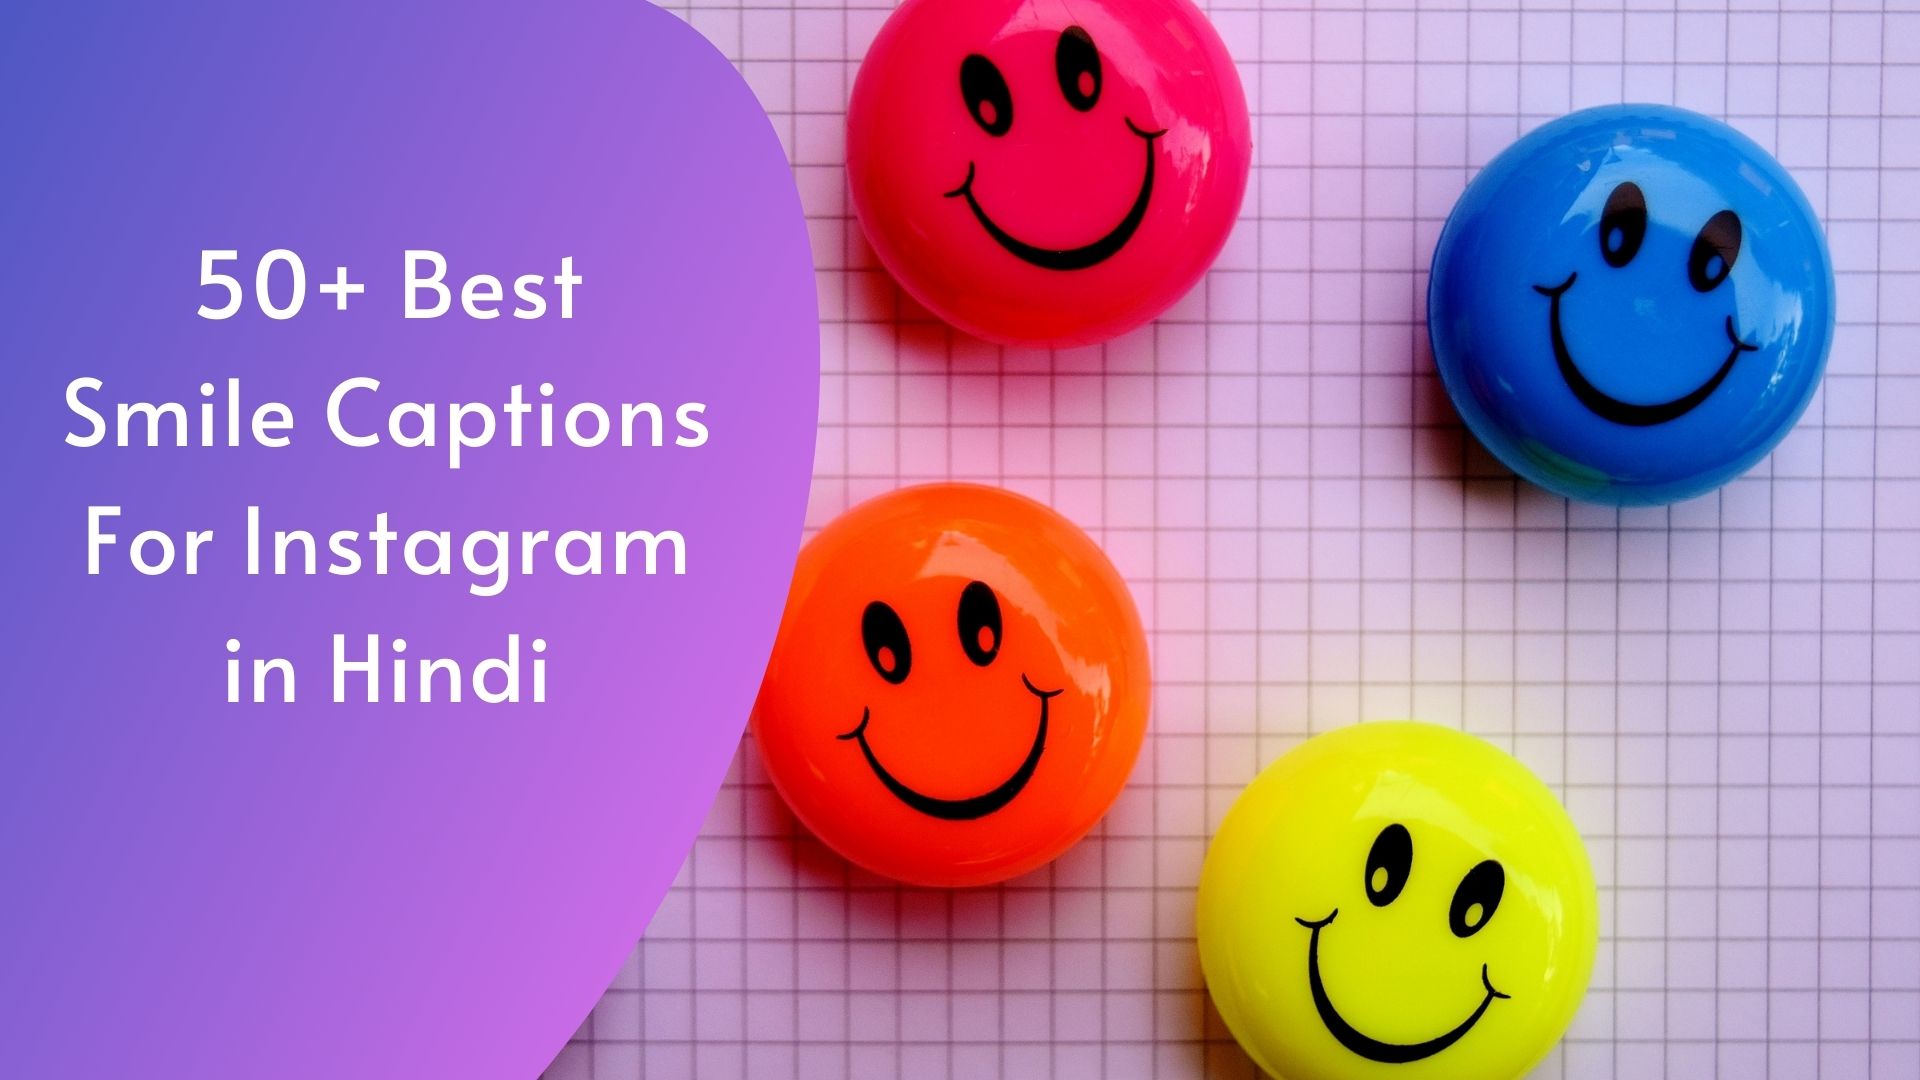 50+ Best Smile Captions For Instagram in Hindi